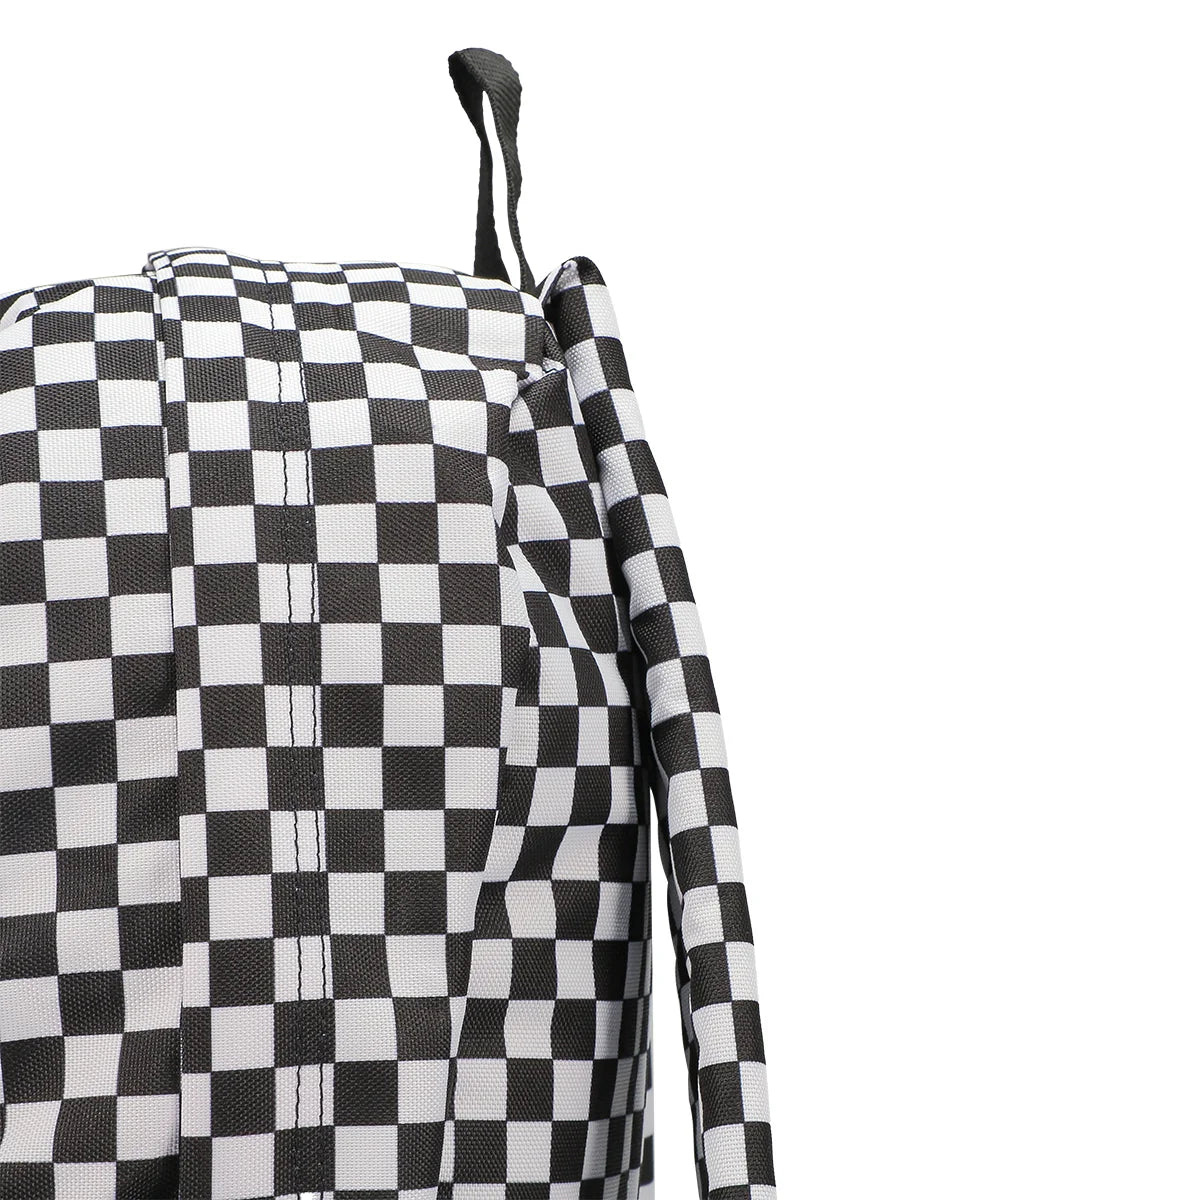 Vans checkered tote bag in black and white